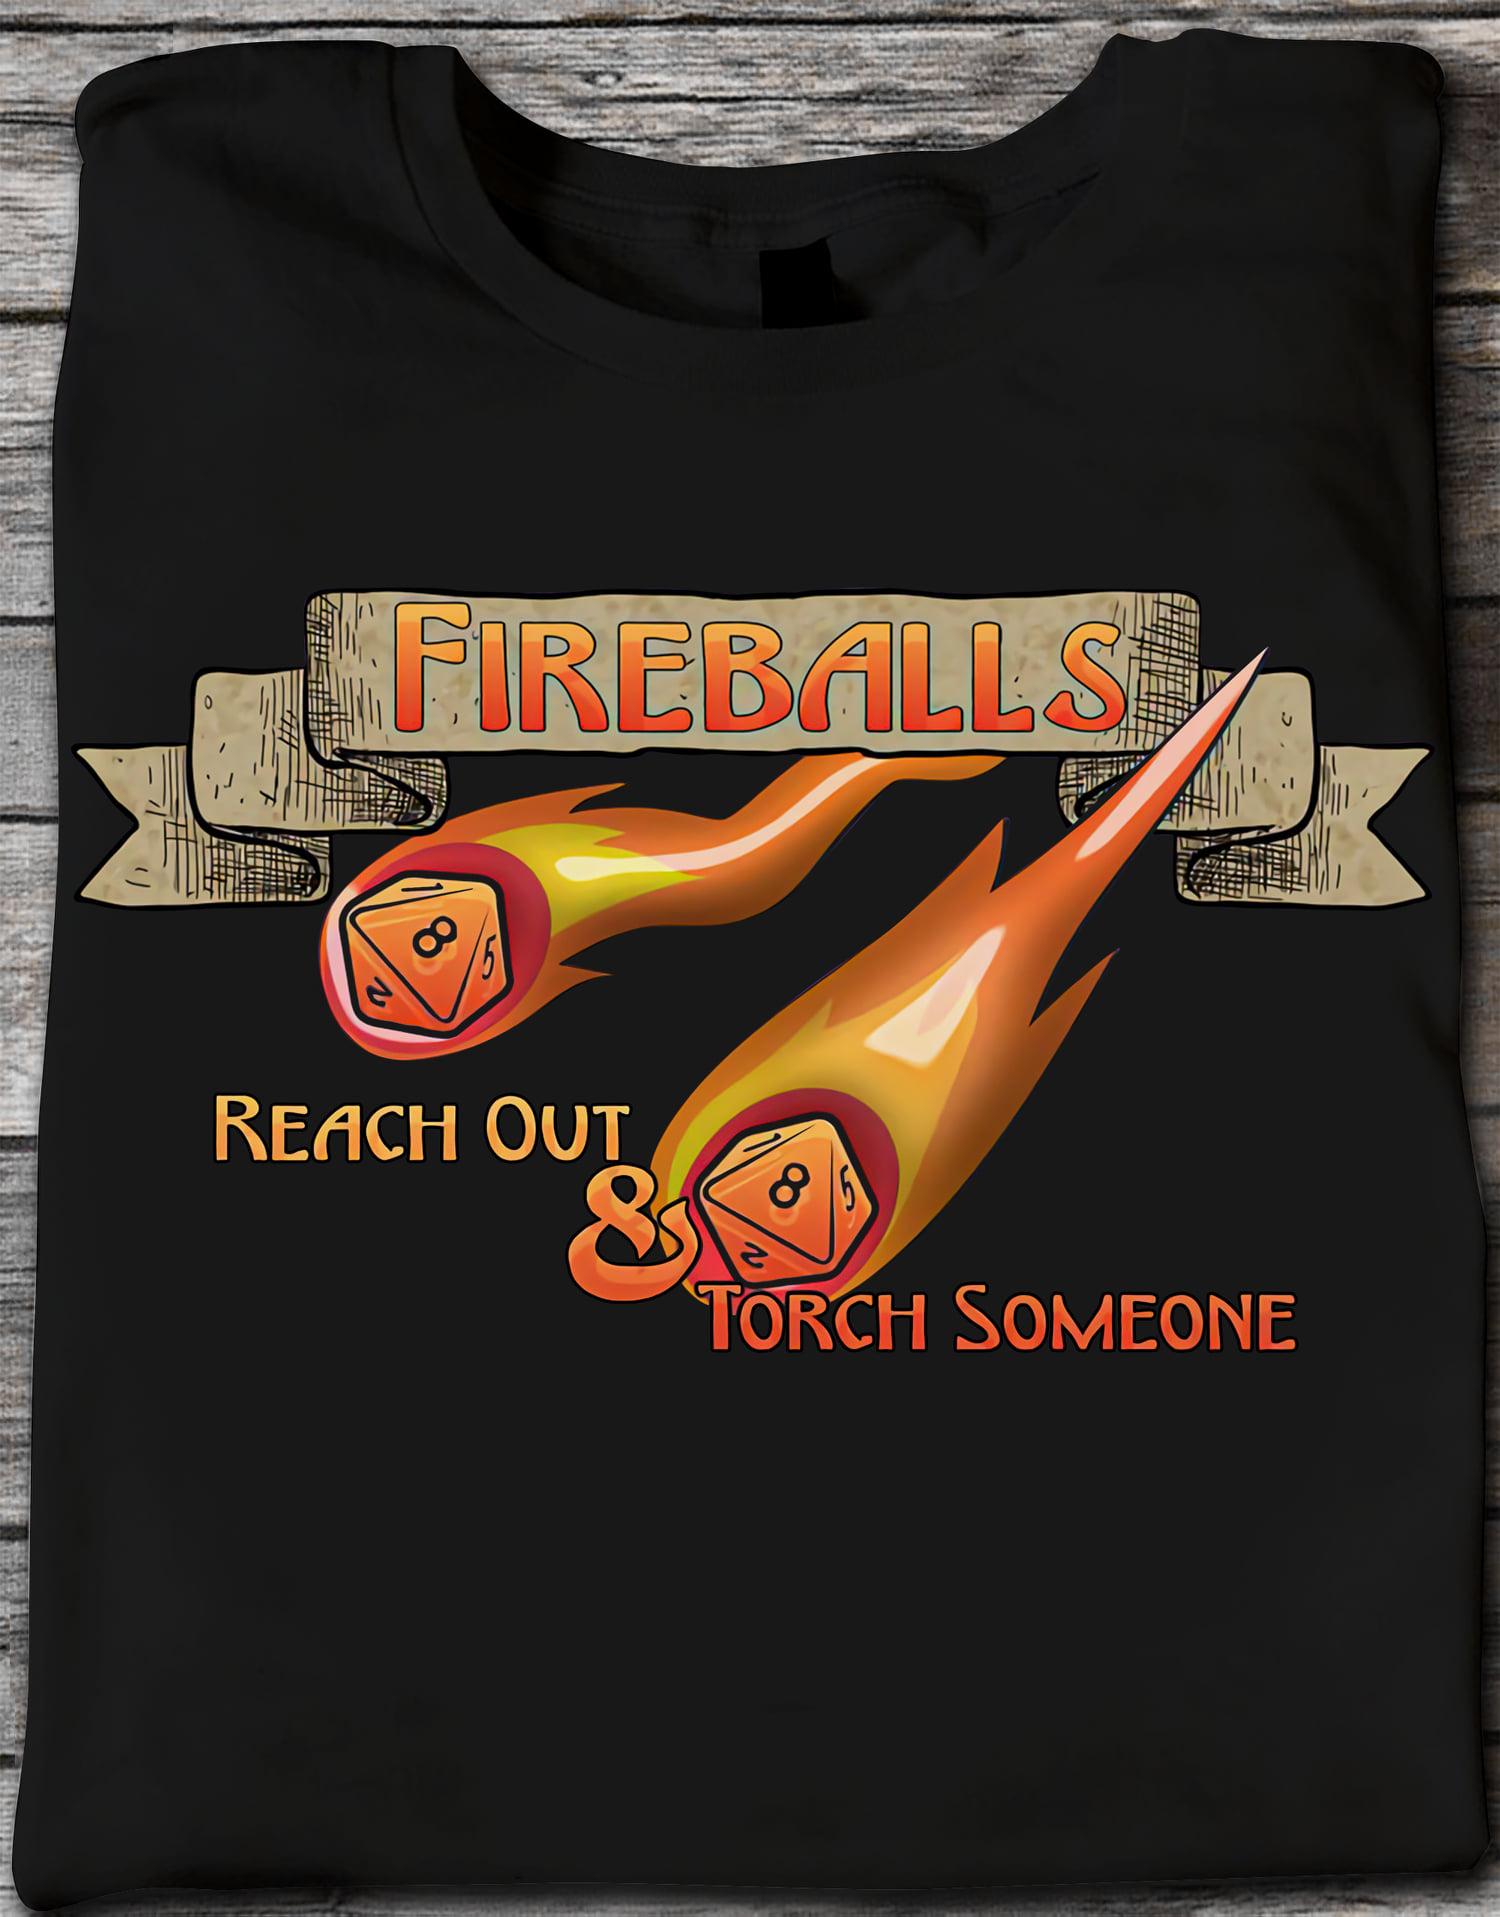 Fireballs reach out and torch someone - Dungeons and Dragons, Flame dices